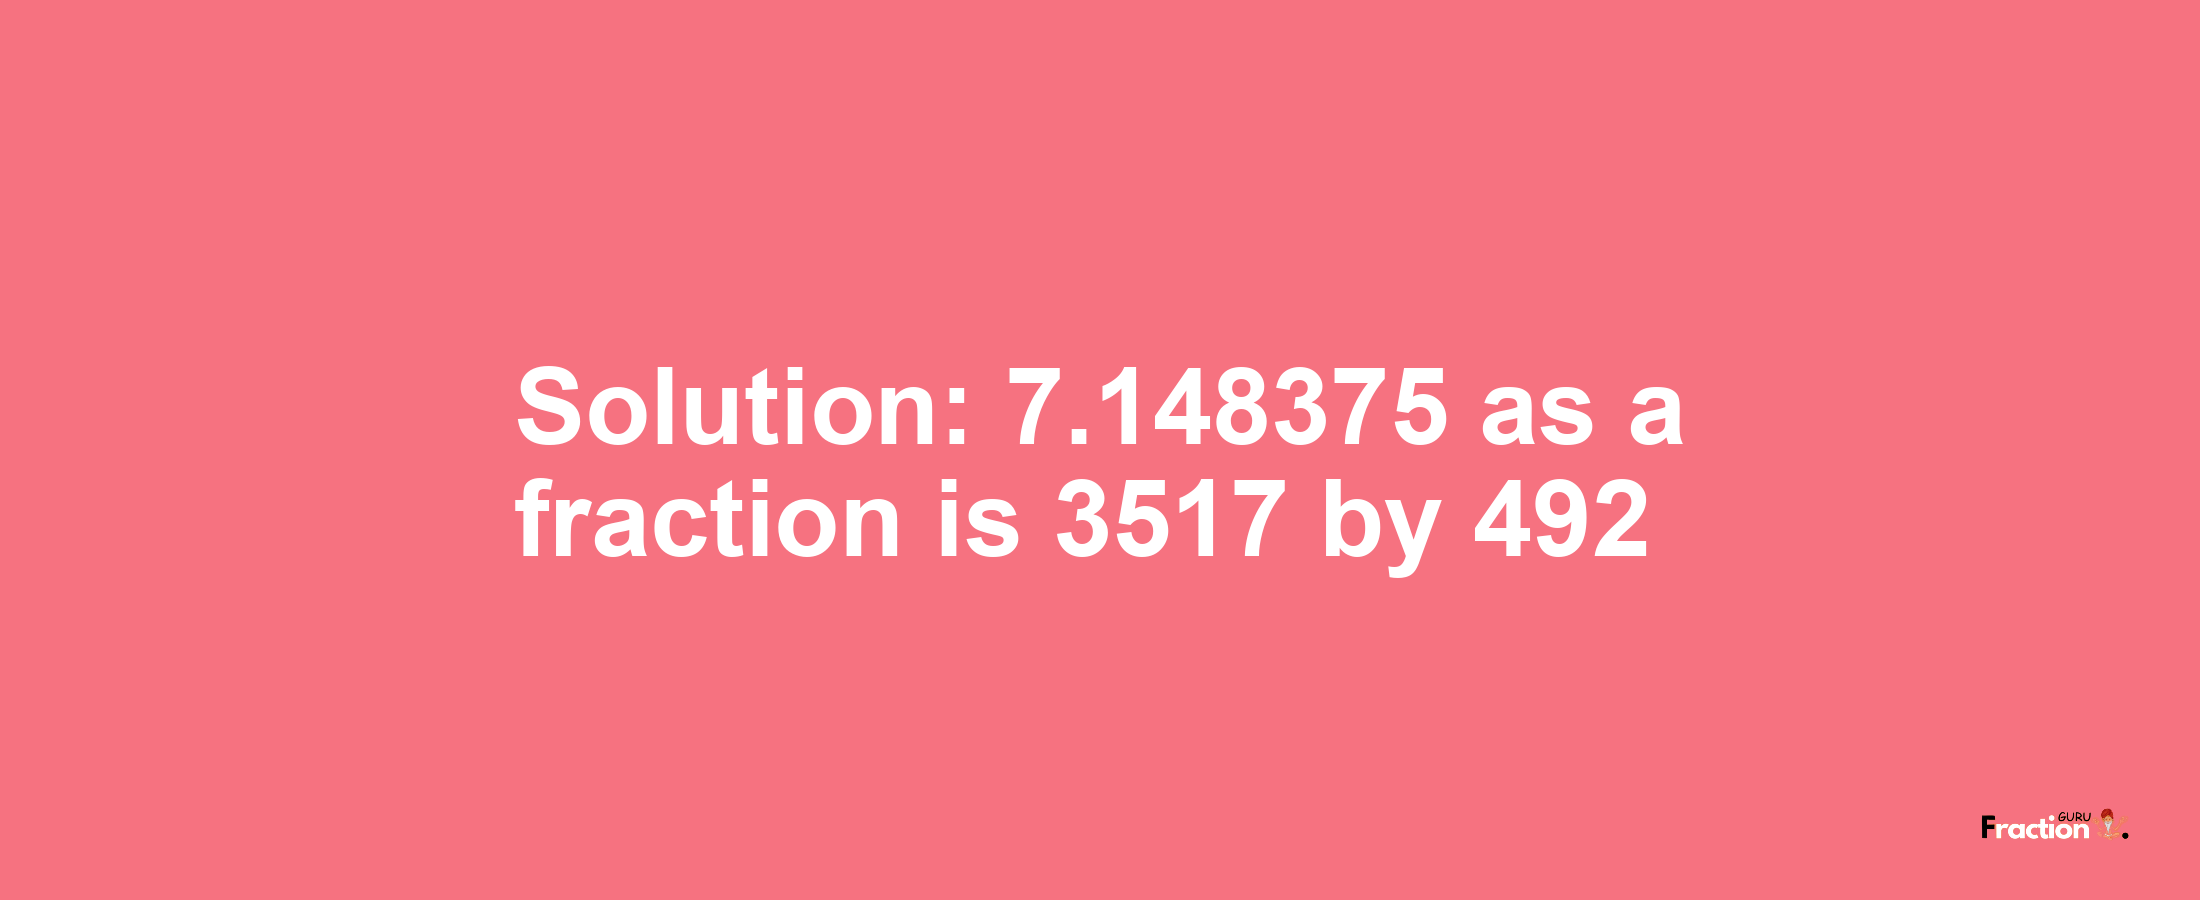 Solution:7.148375 as a fraction is 3517/492